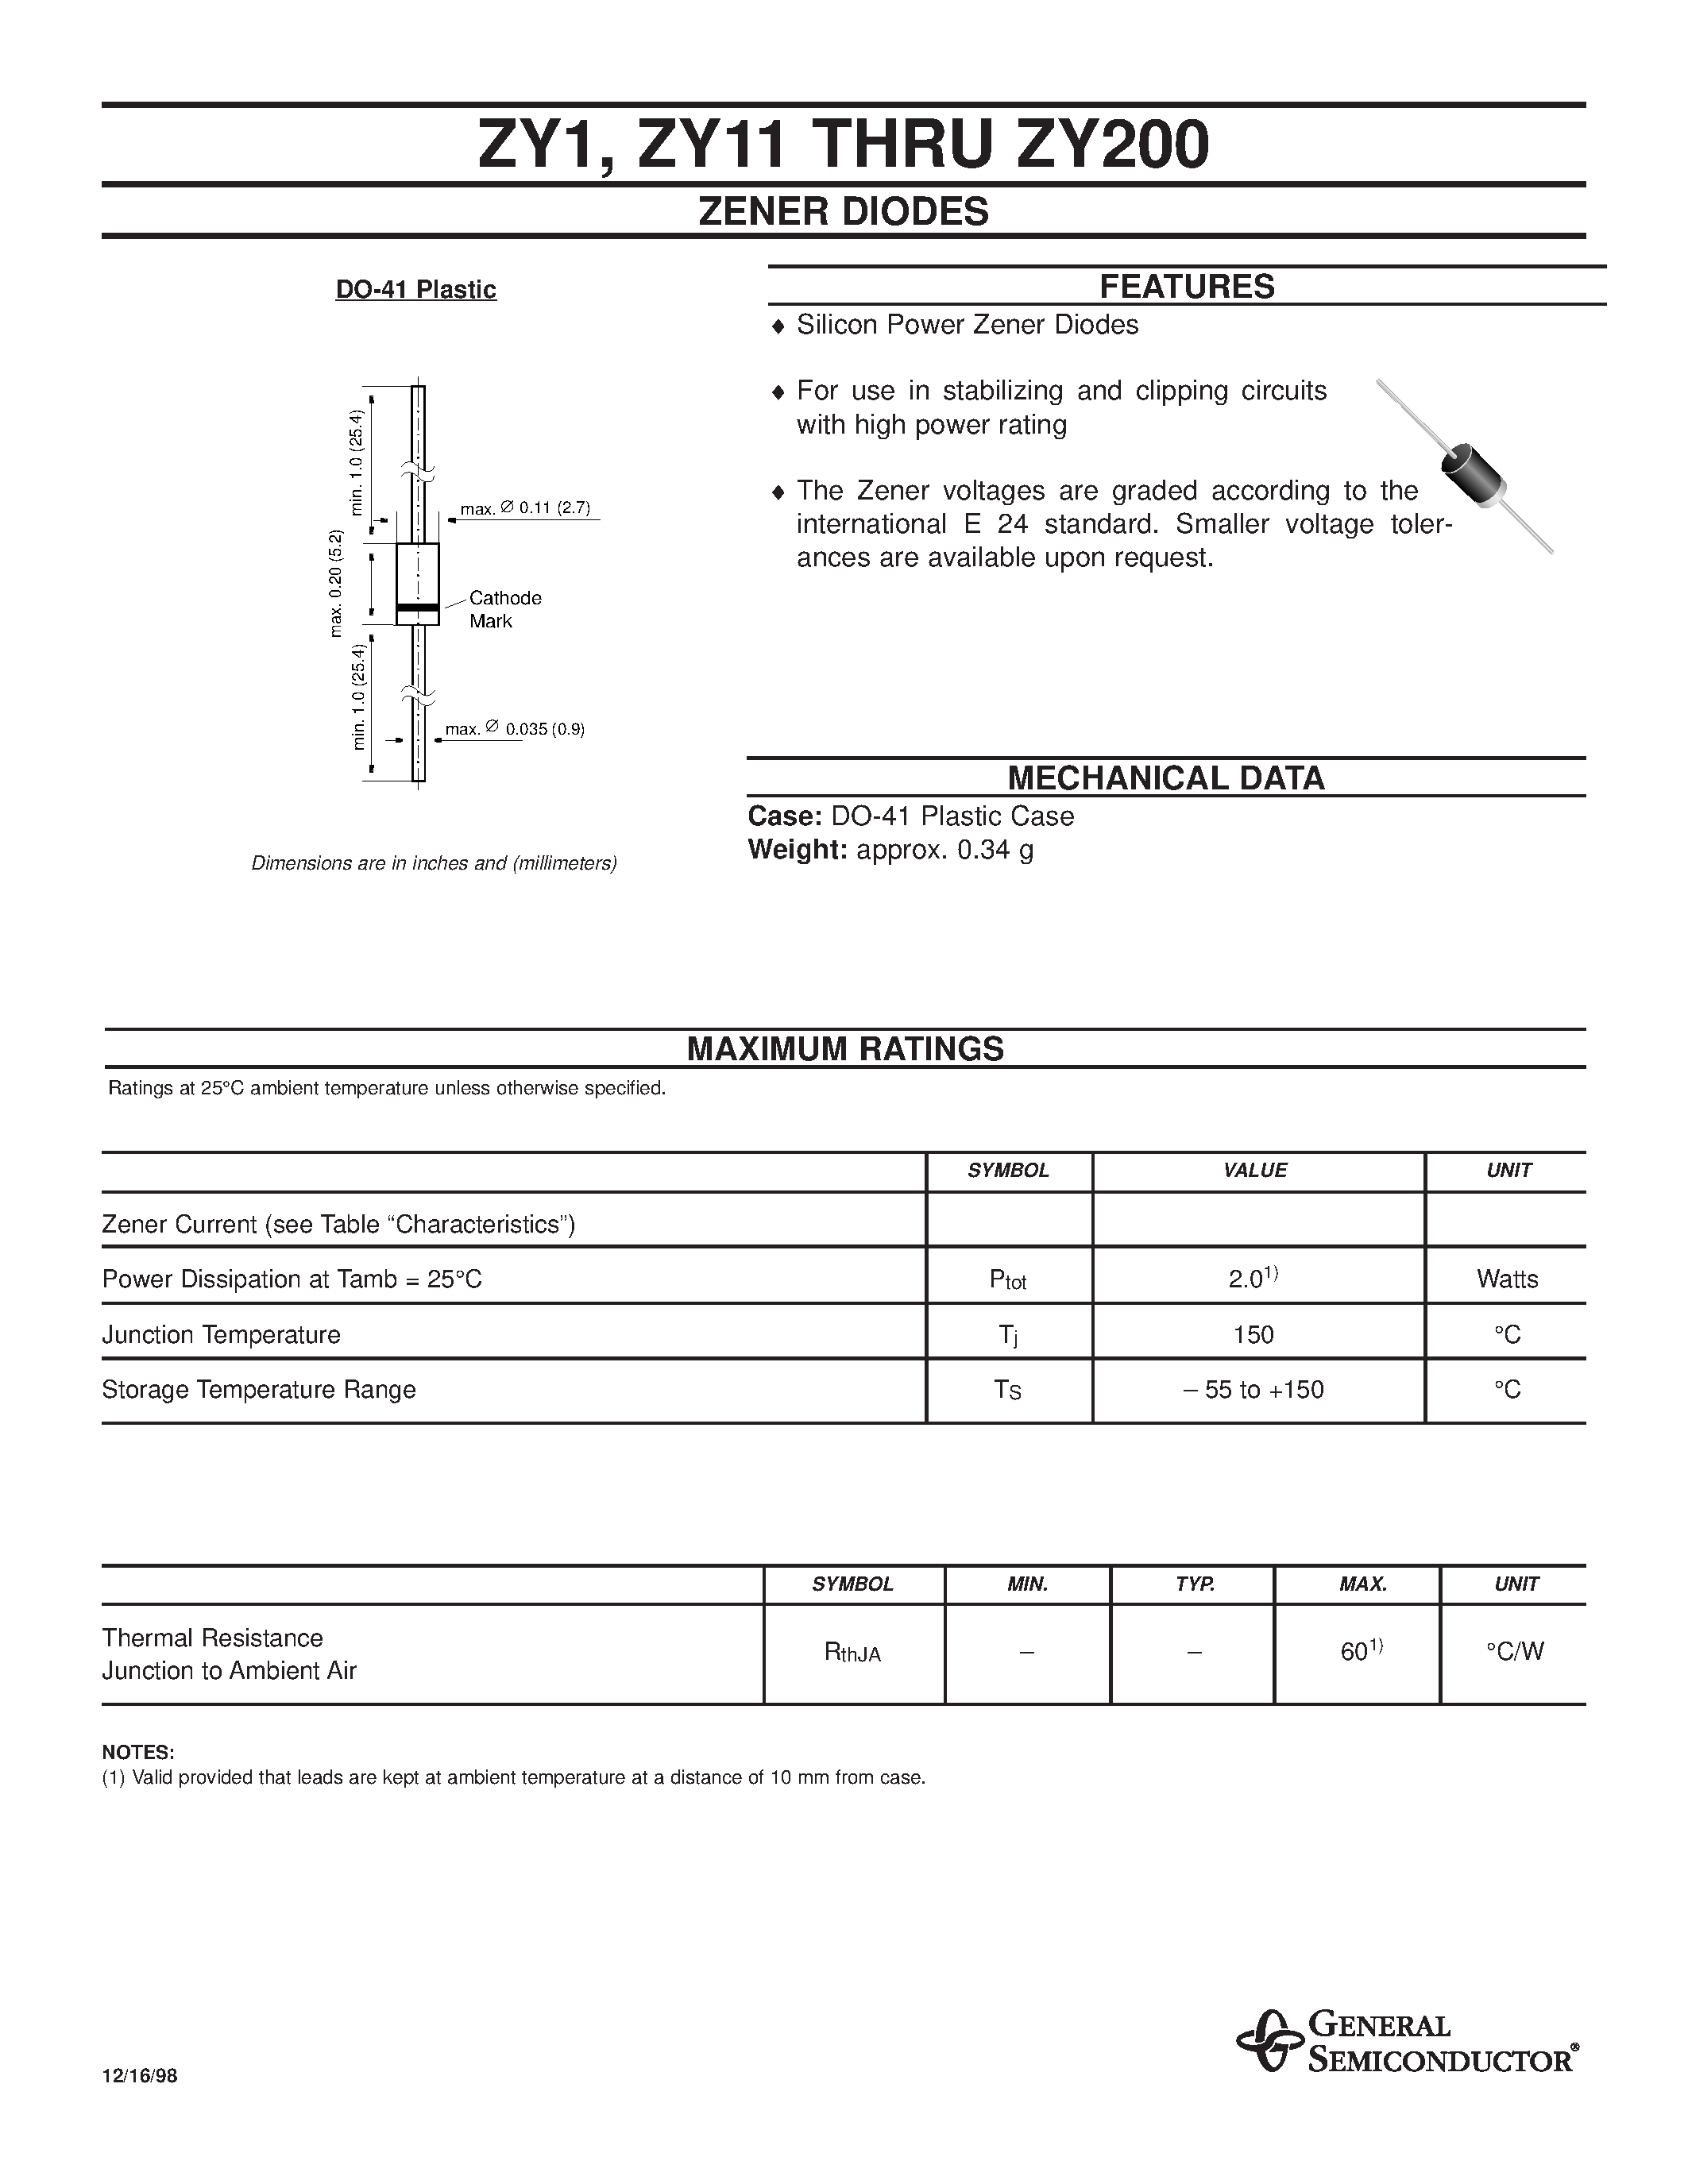 Datasheet ZY47 - ZENER DIODES page 1